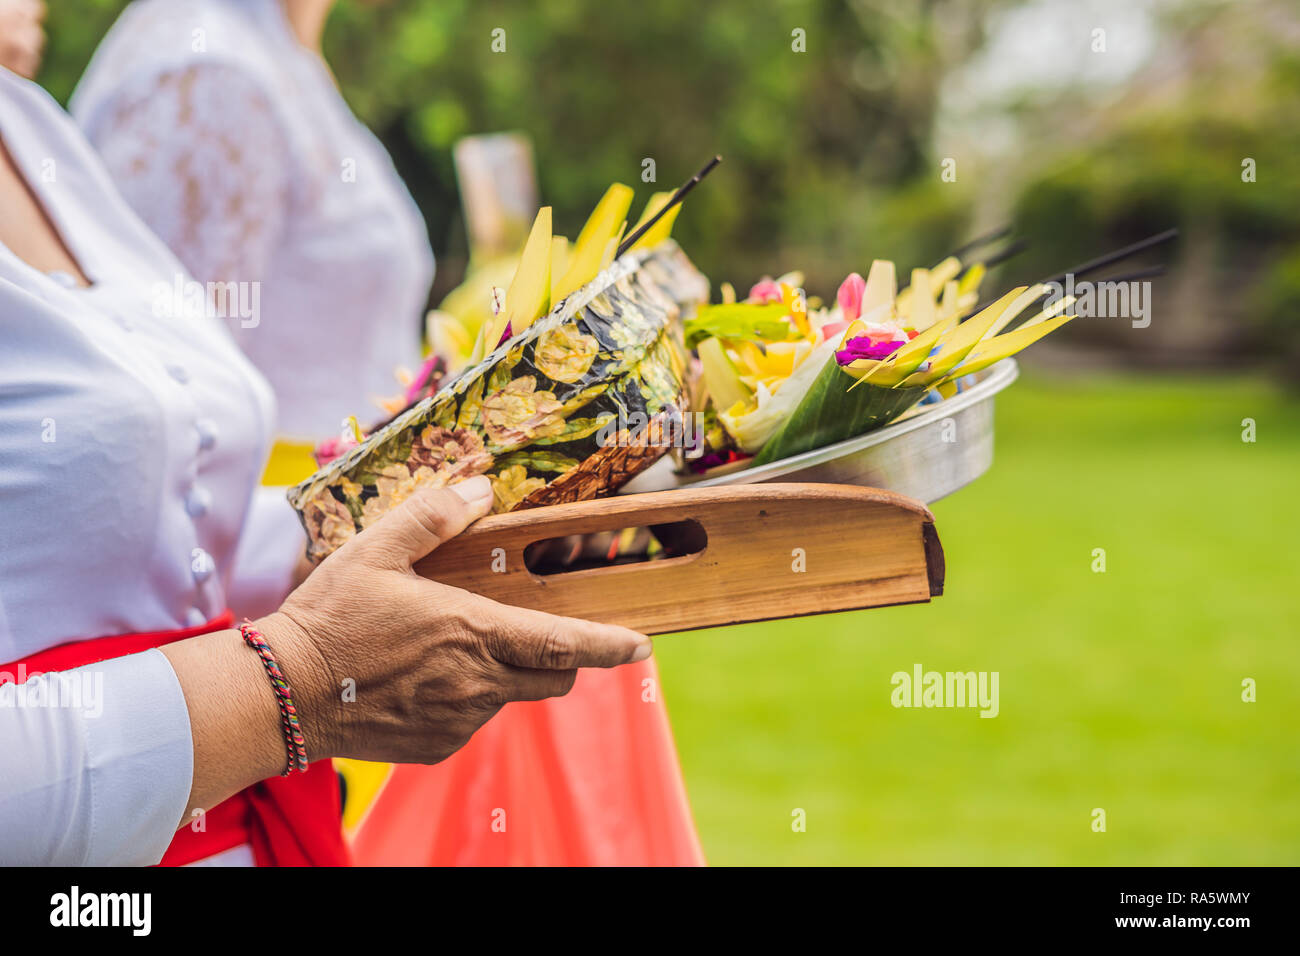 Balinese Hindu Offerings Called Canang. Canang sari is one of the daily offerings made by Balinese Hindus to thank the Sang Hyang Widhi Wasa in praise and prayer and can be seen everywhere in Bali Stock Photo